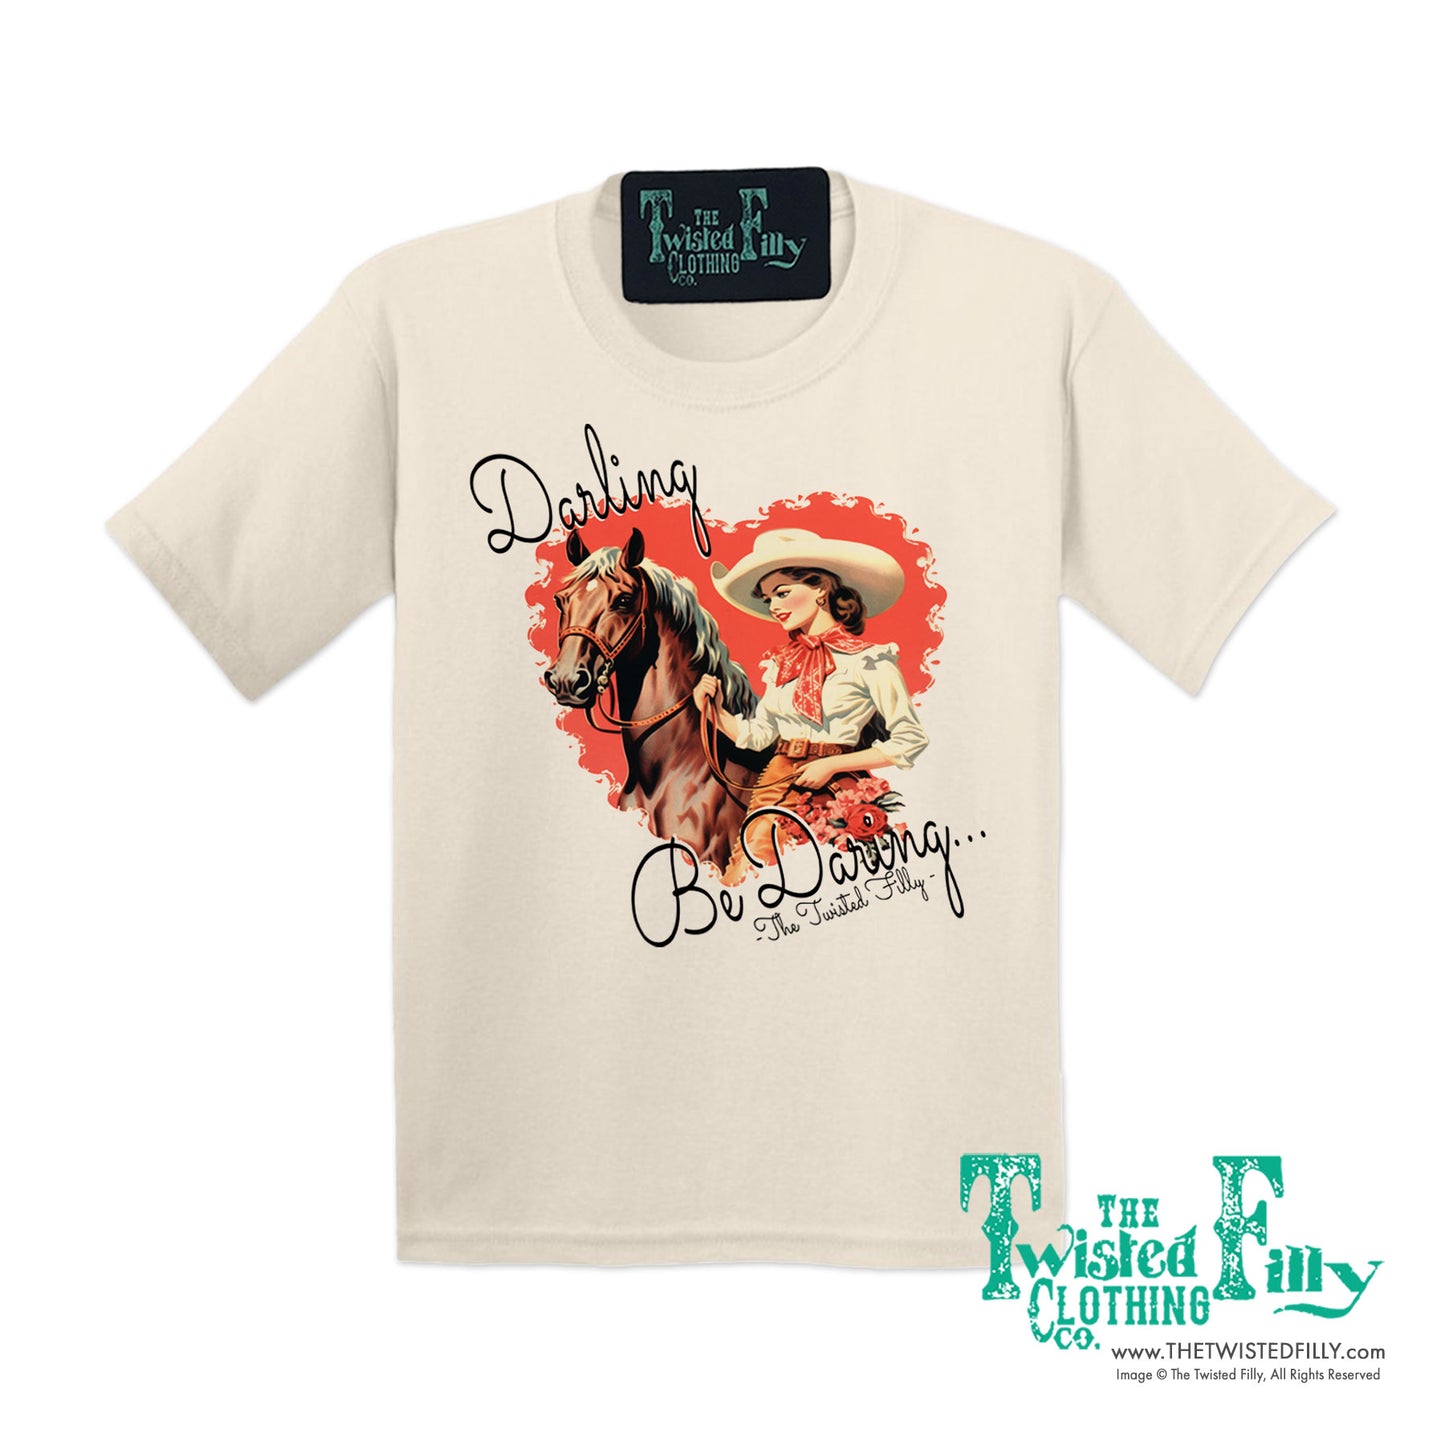 Darling Be Daring - S/S Girls Youth Tee - Assorted Colors